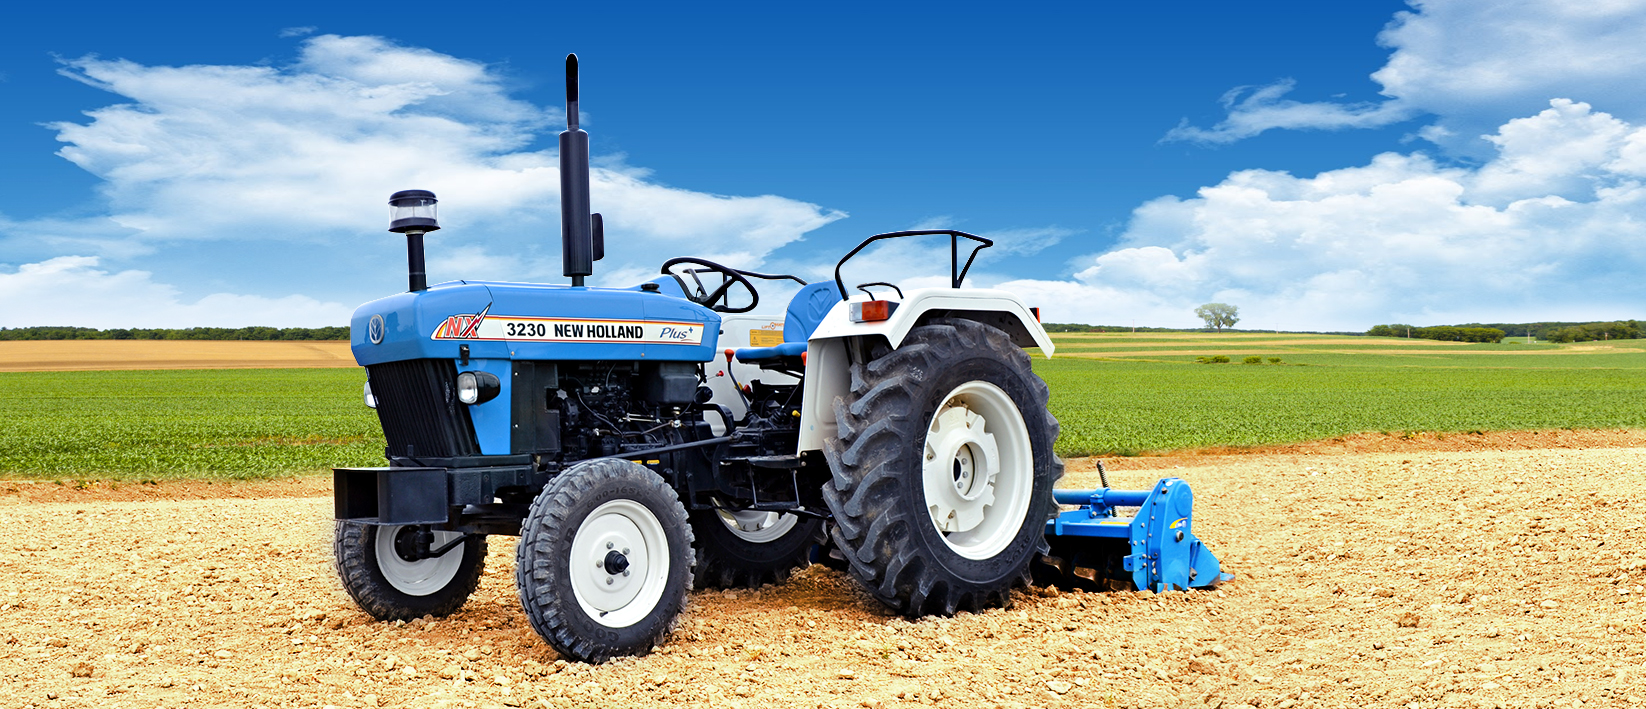 New Holland Tractor #9